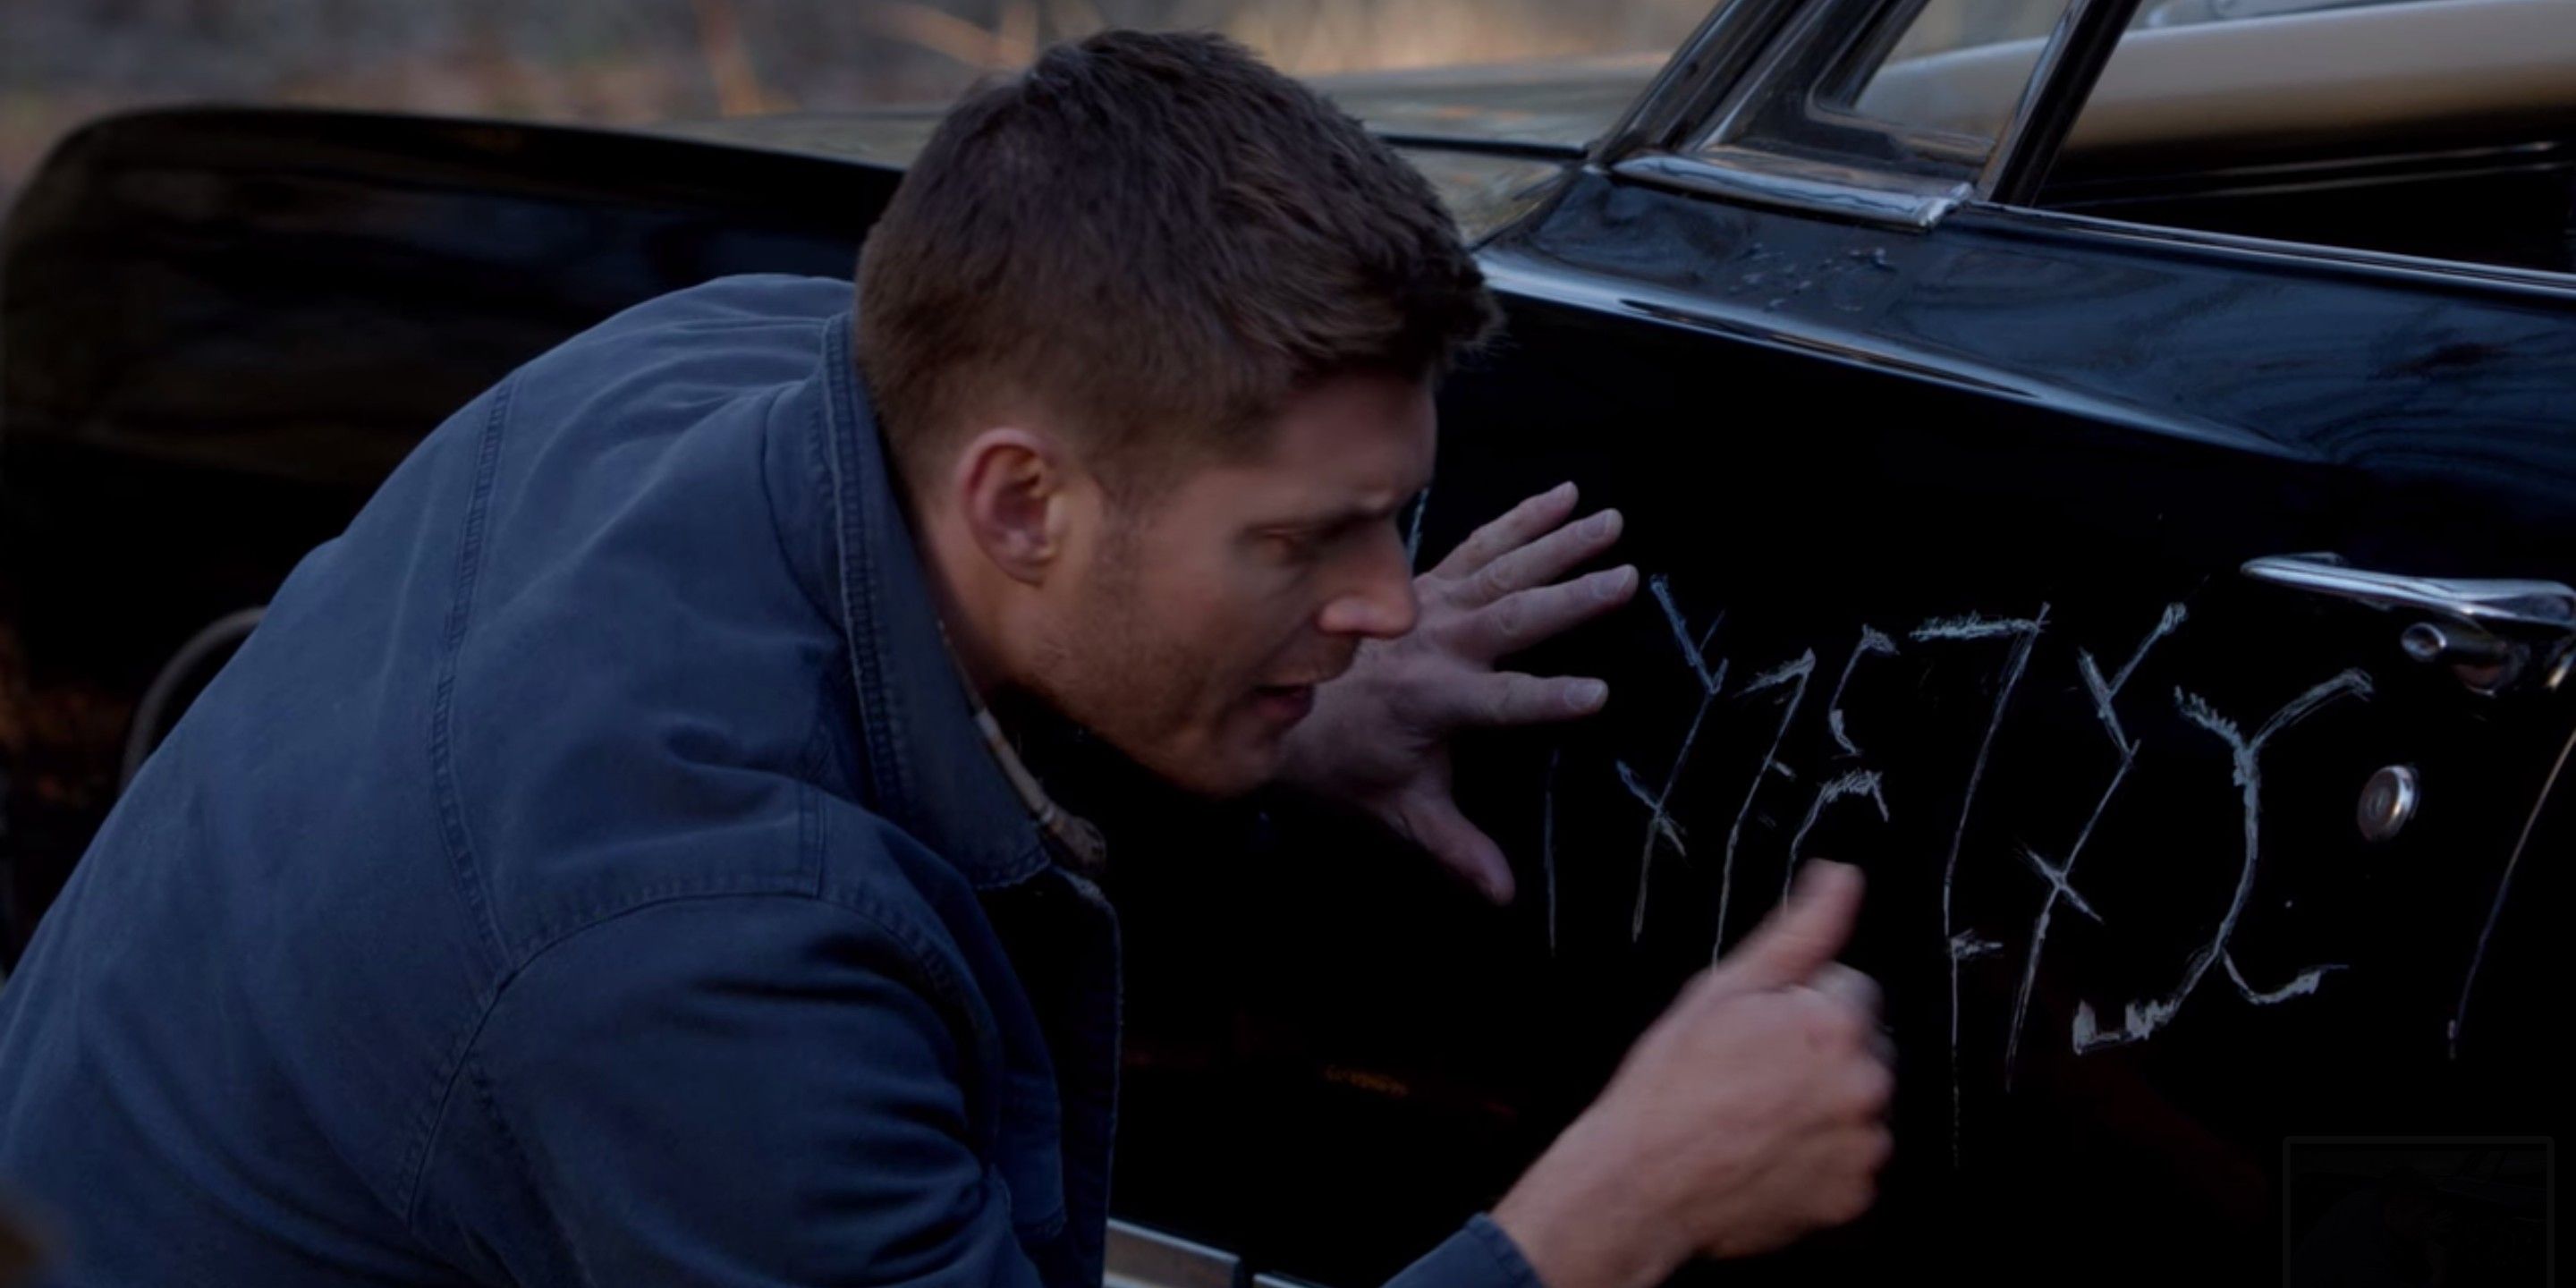 Dean cleans scratches on the Impala